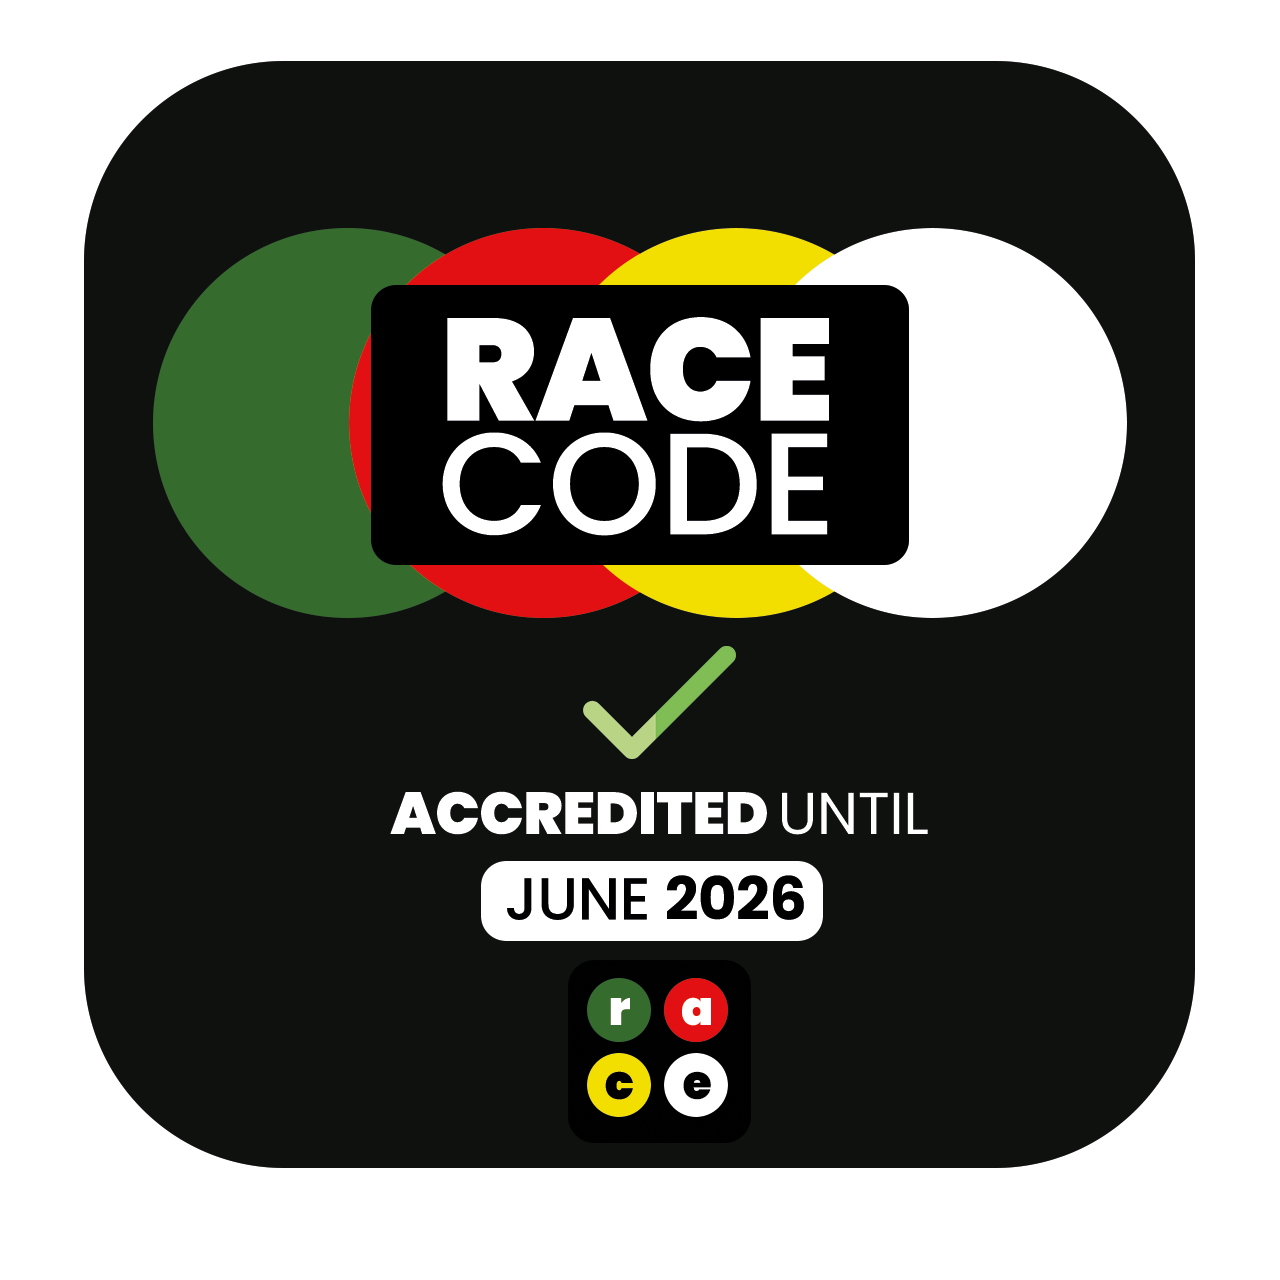 RACE code image accredited until June 2026